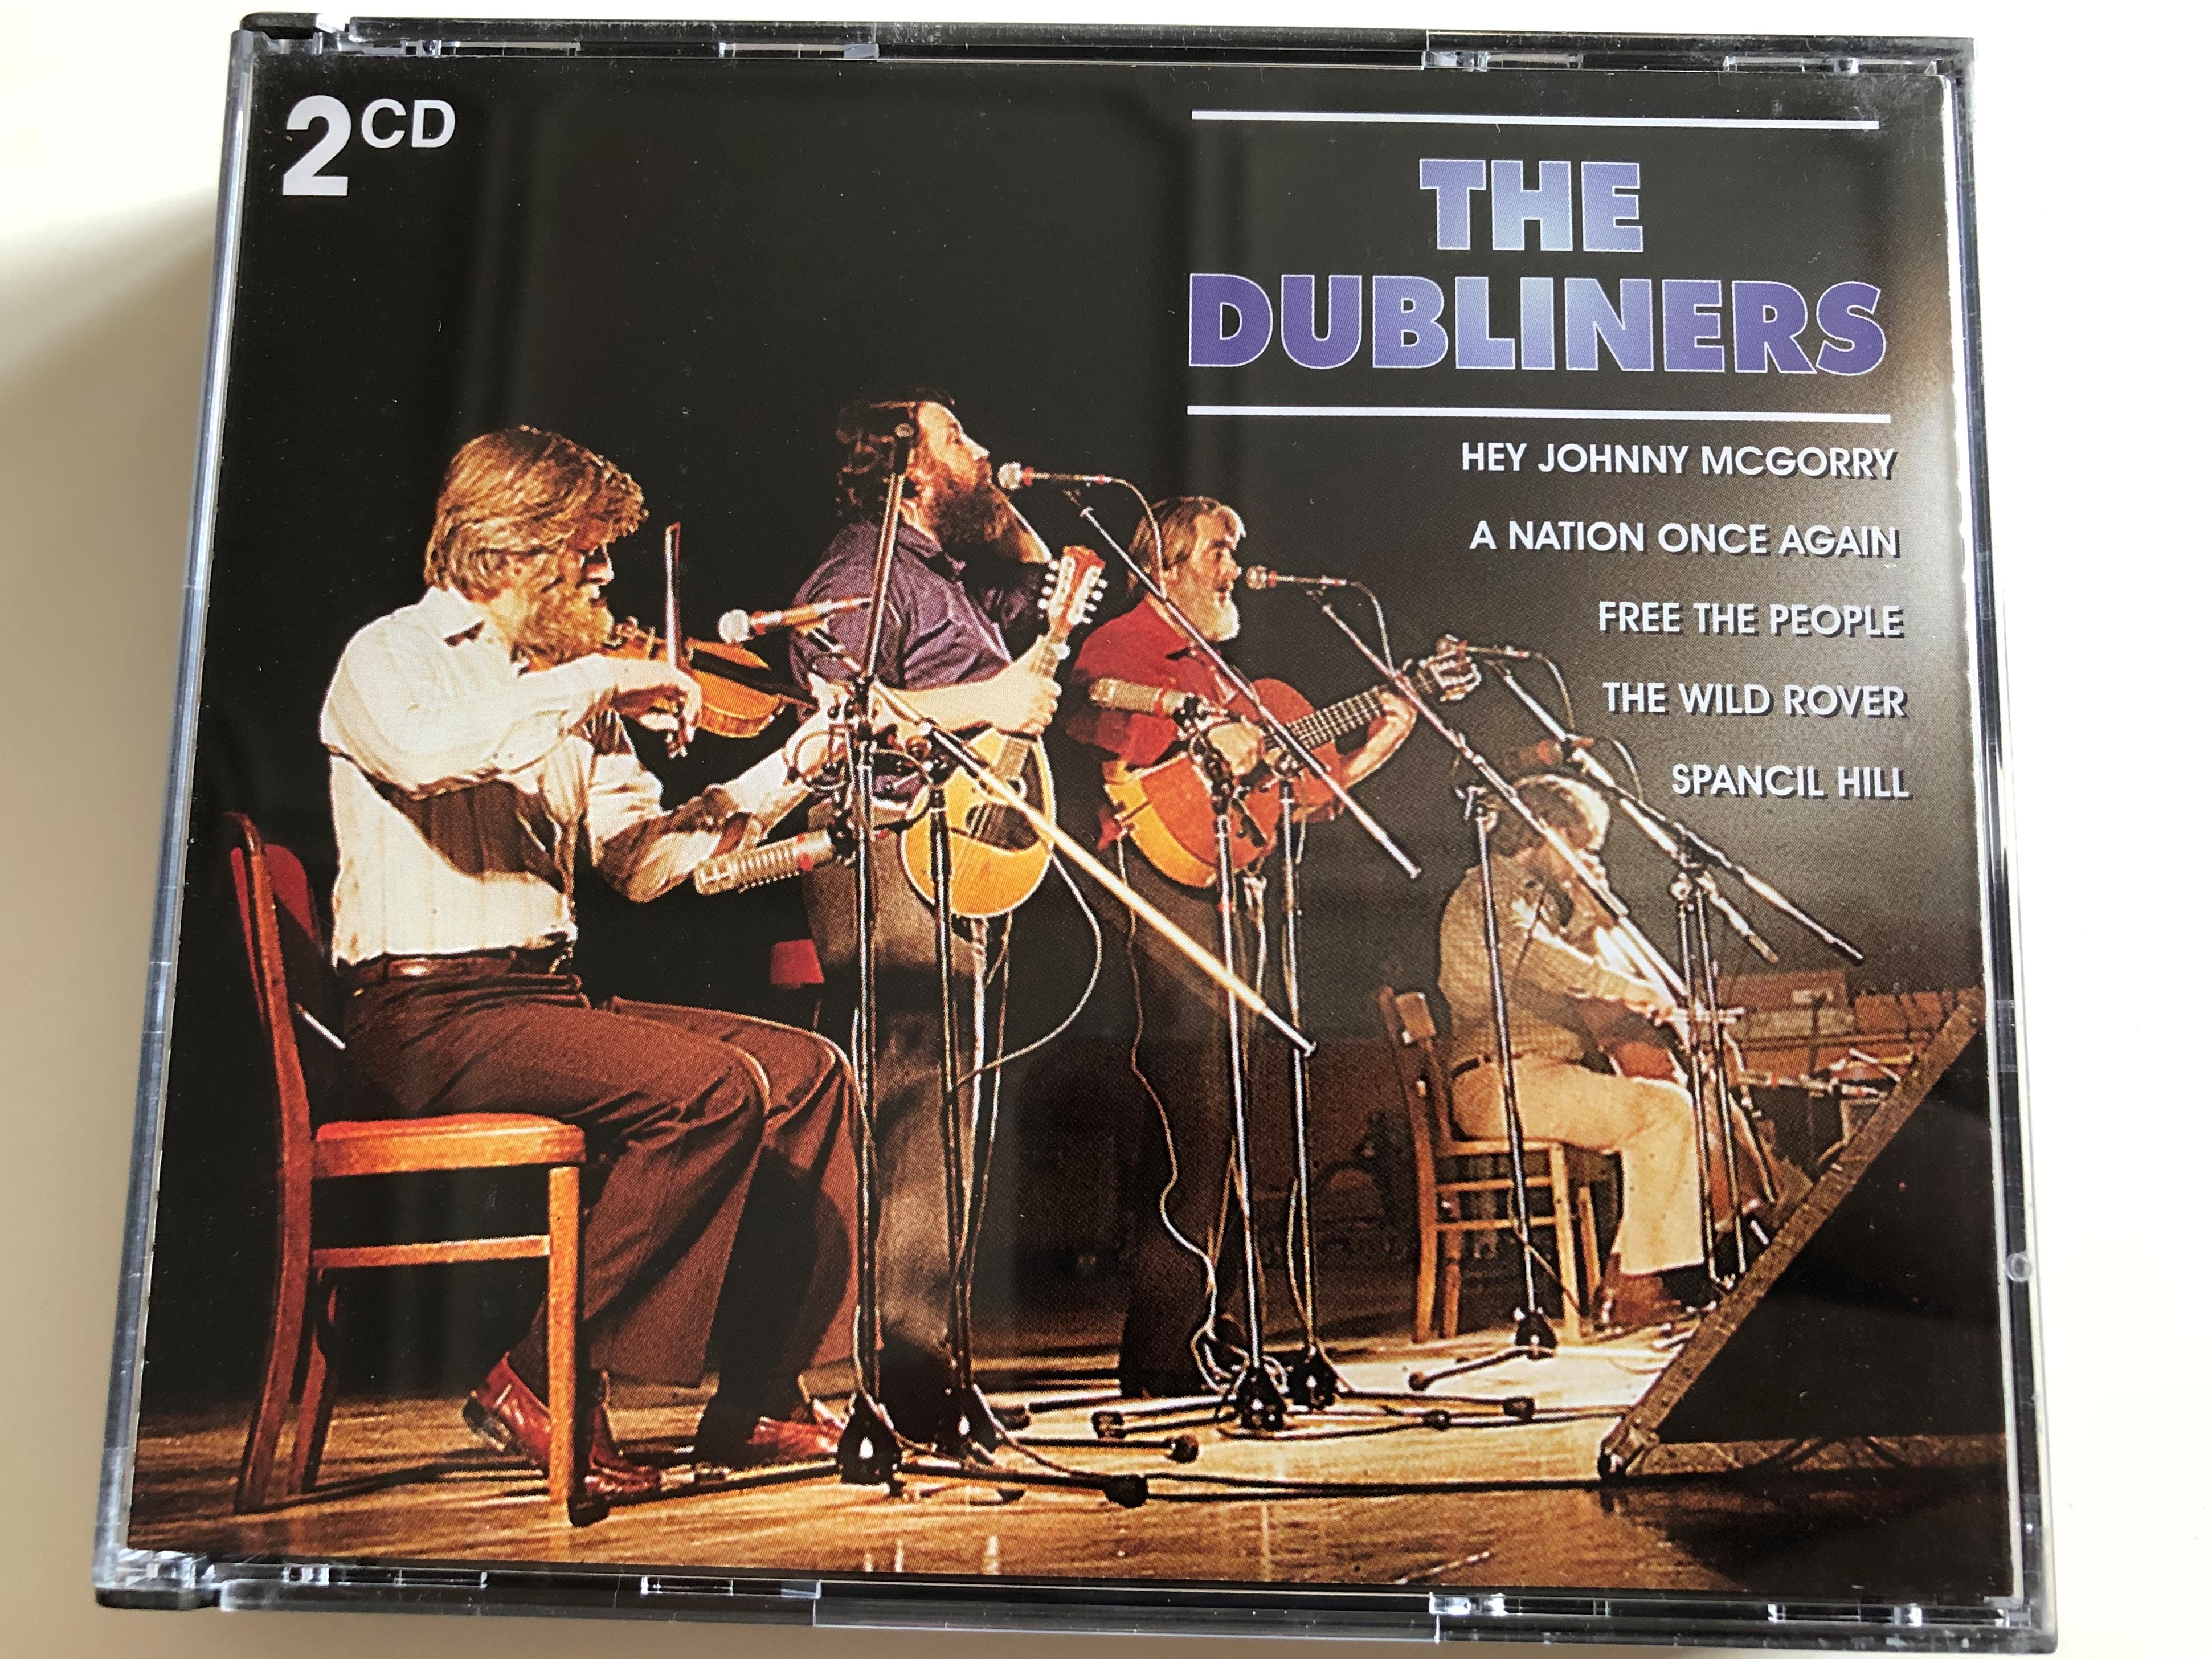 the-dubliners-hey-yohnny-mcgorry-a-nation-once-again-free-the-people-the-wild-rover-spancil-hill-weton-wesgram-2x-audio-cd-1998-kbox-273-1-.jpg